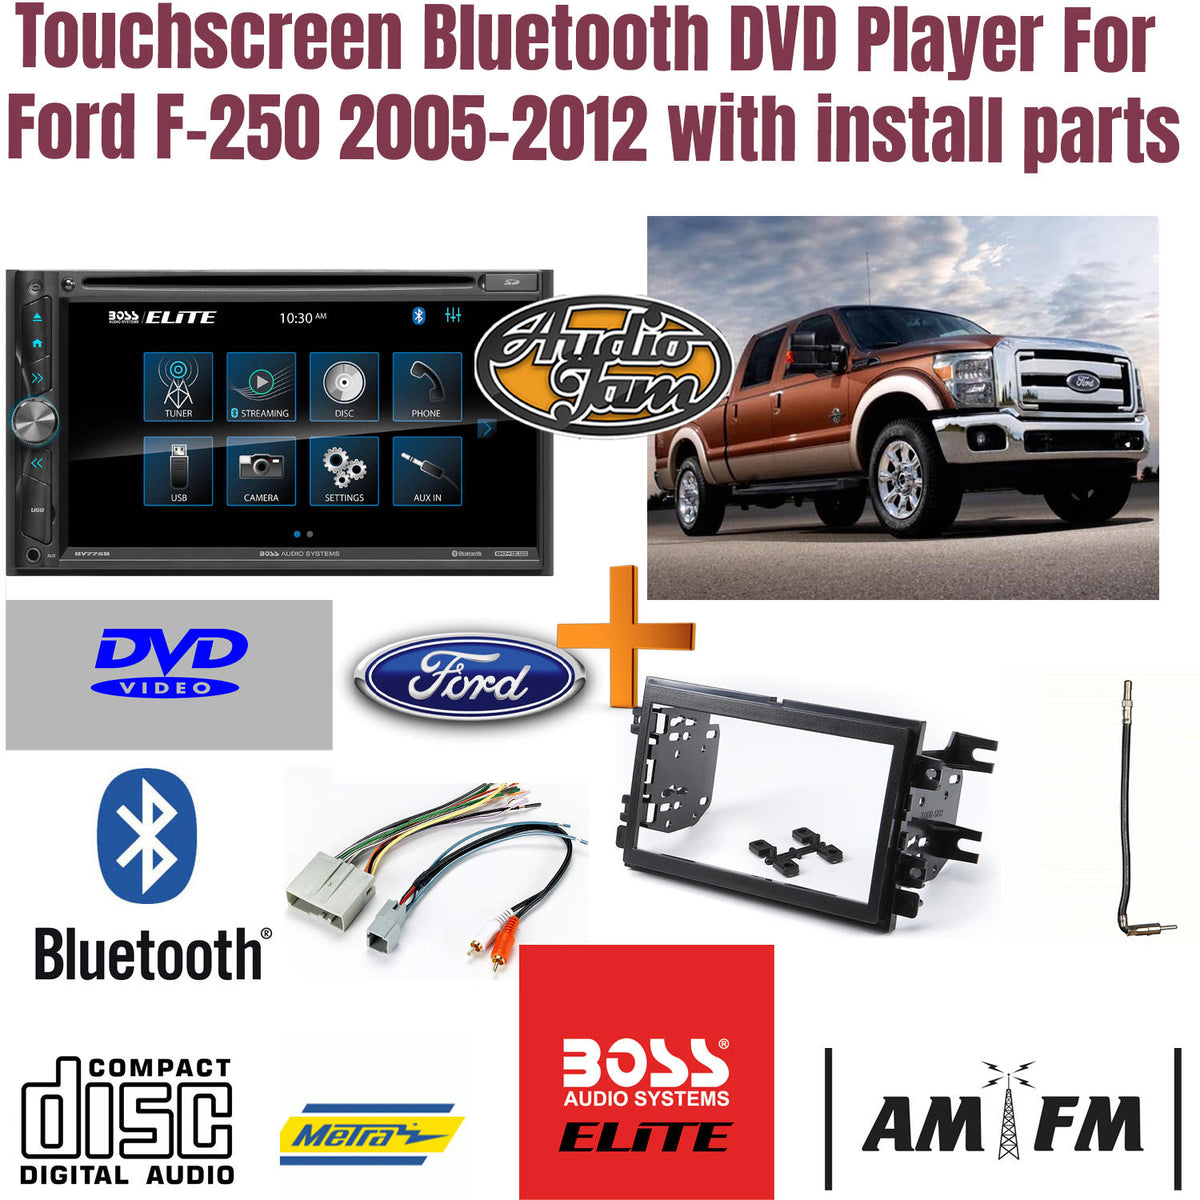 Touchscreen Bluetooth DVD Player For Ford F-250 2005-2012 with install parts